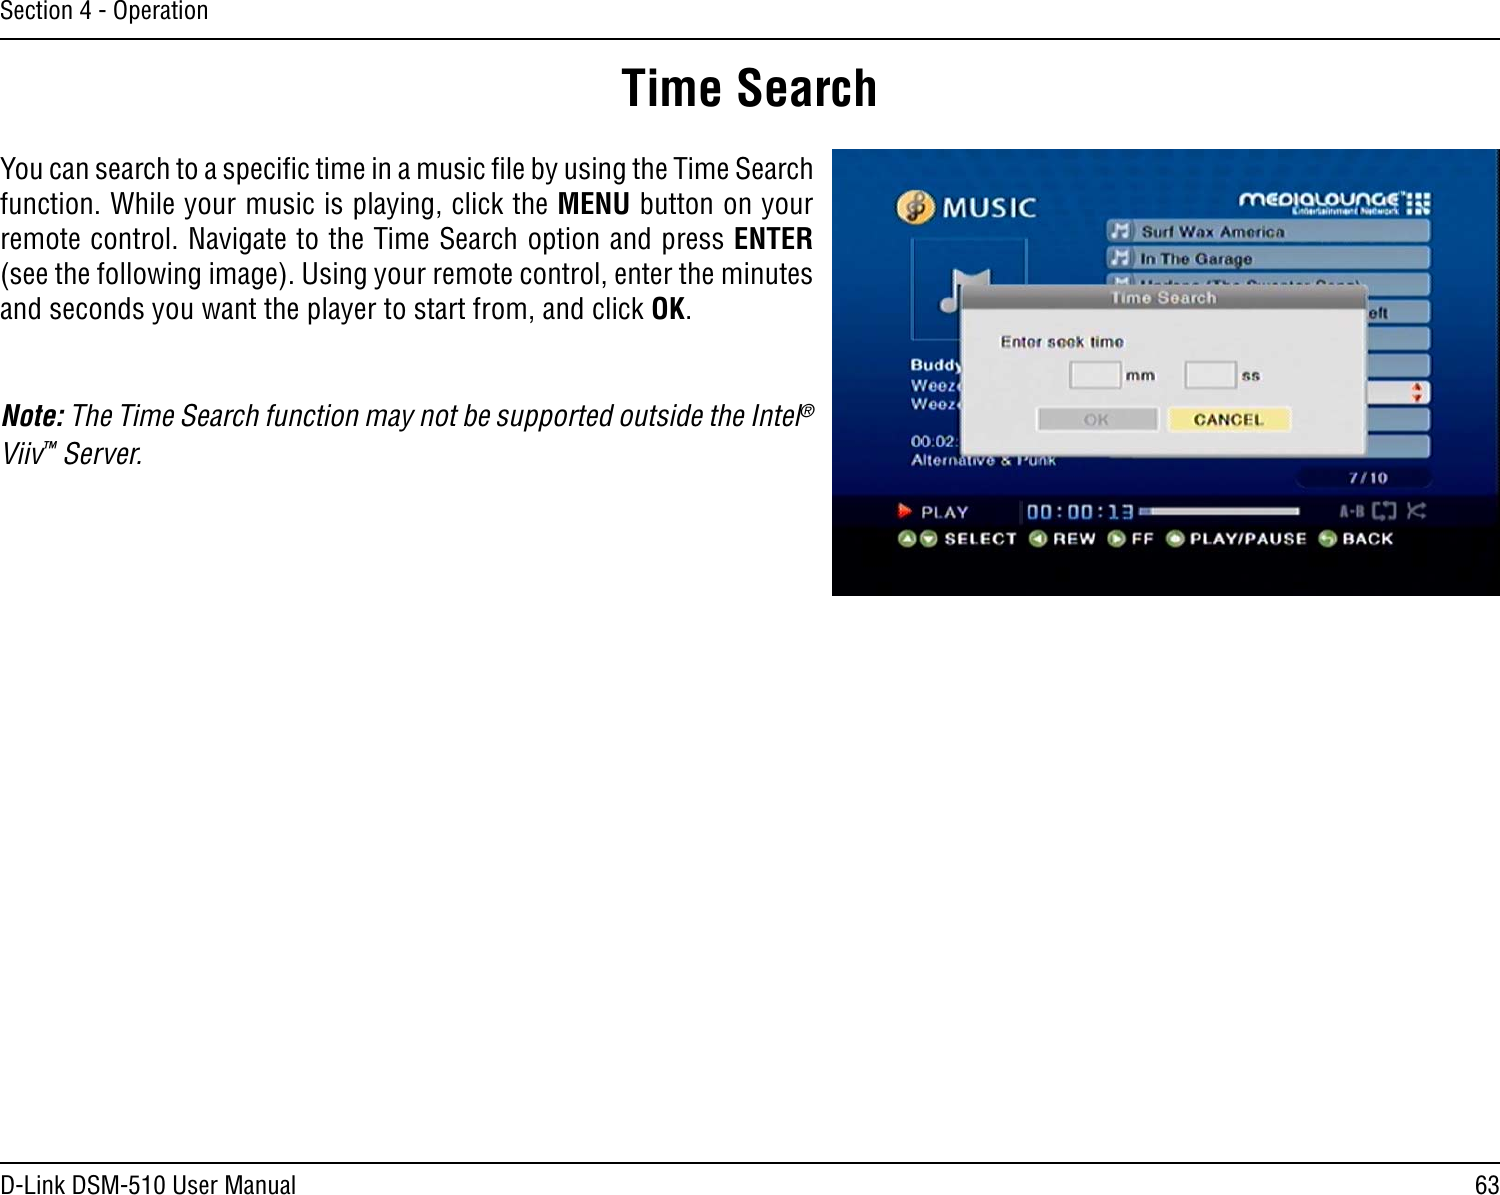 63D-Link DSM-510 User ManualSection 4 - OperationTime SearchYou can search to a speciﬁc time in a music ﬁle by using the Time Search function. While your music is playing, click the MENU button on your remote control. Navigate to the Time Search option and press ENTER (see the following image). Using your remote control, enter the minutes and seconds you want the player to start from, and click OK.Note: The Time Search function may not be supported outside the Intel® Viiv™ Server.